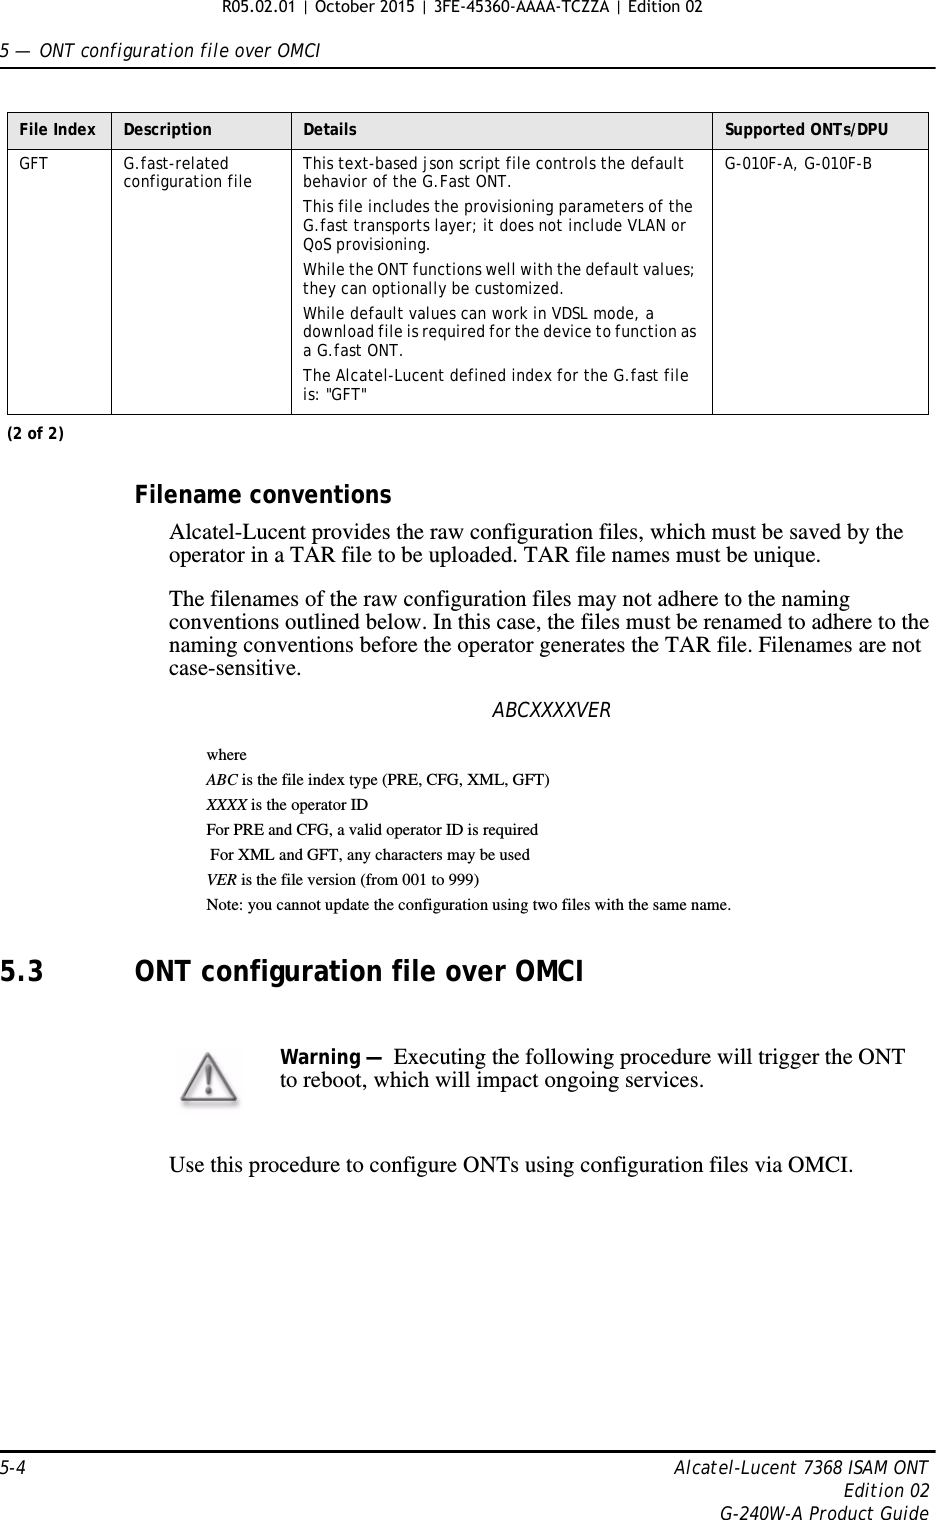 5 —  ONT configuration file over OMCI5-4 Alcatel-Lucent 7368 ISAM ONTEdition 02G-240W-A Product GuideFilename conventionsAlcatel-Lucent provides the raw configuration files, which must be saved by the operator in a TAR file to be uploaded. TAR file names must be unique.The filenames of the raw configuration files may not adhere to the naming conventions outlined below. In this case, the files must be renamed to adhere to the naming conventions before the operator generates the TAR file. Filenames are not case-sensitive.ABCXXXXVERwhereABC is the file index type (PRE, CFG, XML, GFT)XXXX is the operator IDFor PRE and CFG, a valid operator ID is required For XML and GFT, any characters may be usedVER is the file version (from 001 to 999) Note: you cannot update the configuration using two files with the same name.5.3 ONT configuration file over OMCIUse this procedure to configure ONTs using configuration files via OMCI.GFT G.fast-related configuration file This text-based json script file controls the default behavior of the G.Fast ONT. This file includes the provisioning parameters of the G.fast transports layer; it does not include VLAN or QoS provisioning. While the ONT functions well with the default values; they can optionally be customized. While default values can work in VDSL mode, a download file is required for the device to function as a G.fast ONT.The Alcatel-Lucent defined index for the G.fast file is: &quot;GFT&quot;G-010F-A, G-010F-BFile Index Description Details Supported ONTs/DPU(2 of 2)Warning —  Executing the following procedure will trigger the ONT to reboot, which will impact ongoing services. R05.02.01 | October 2015 | 3FE-45360-AAAA-TCZZA | Edition 02 